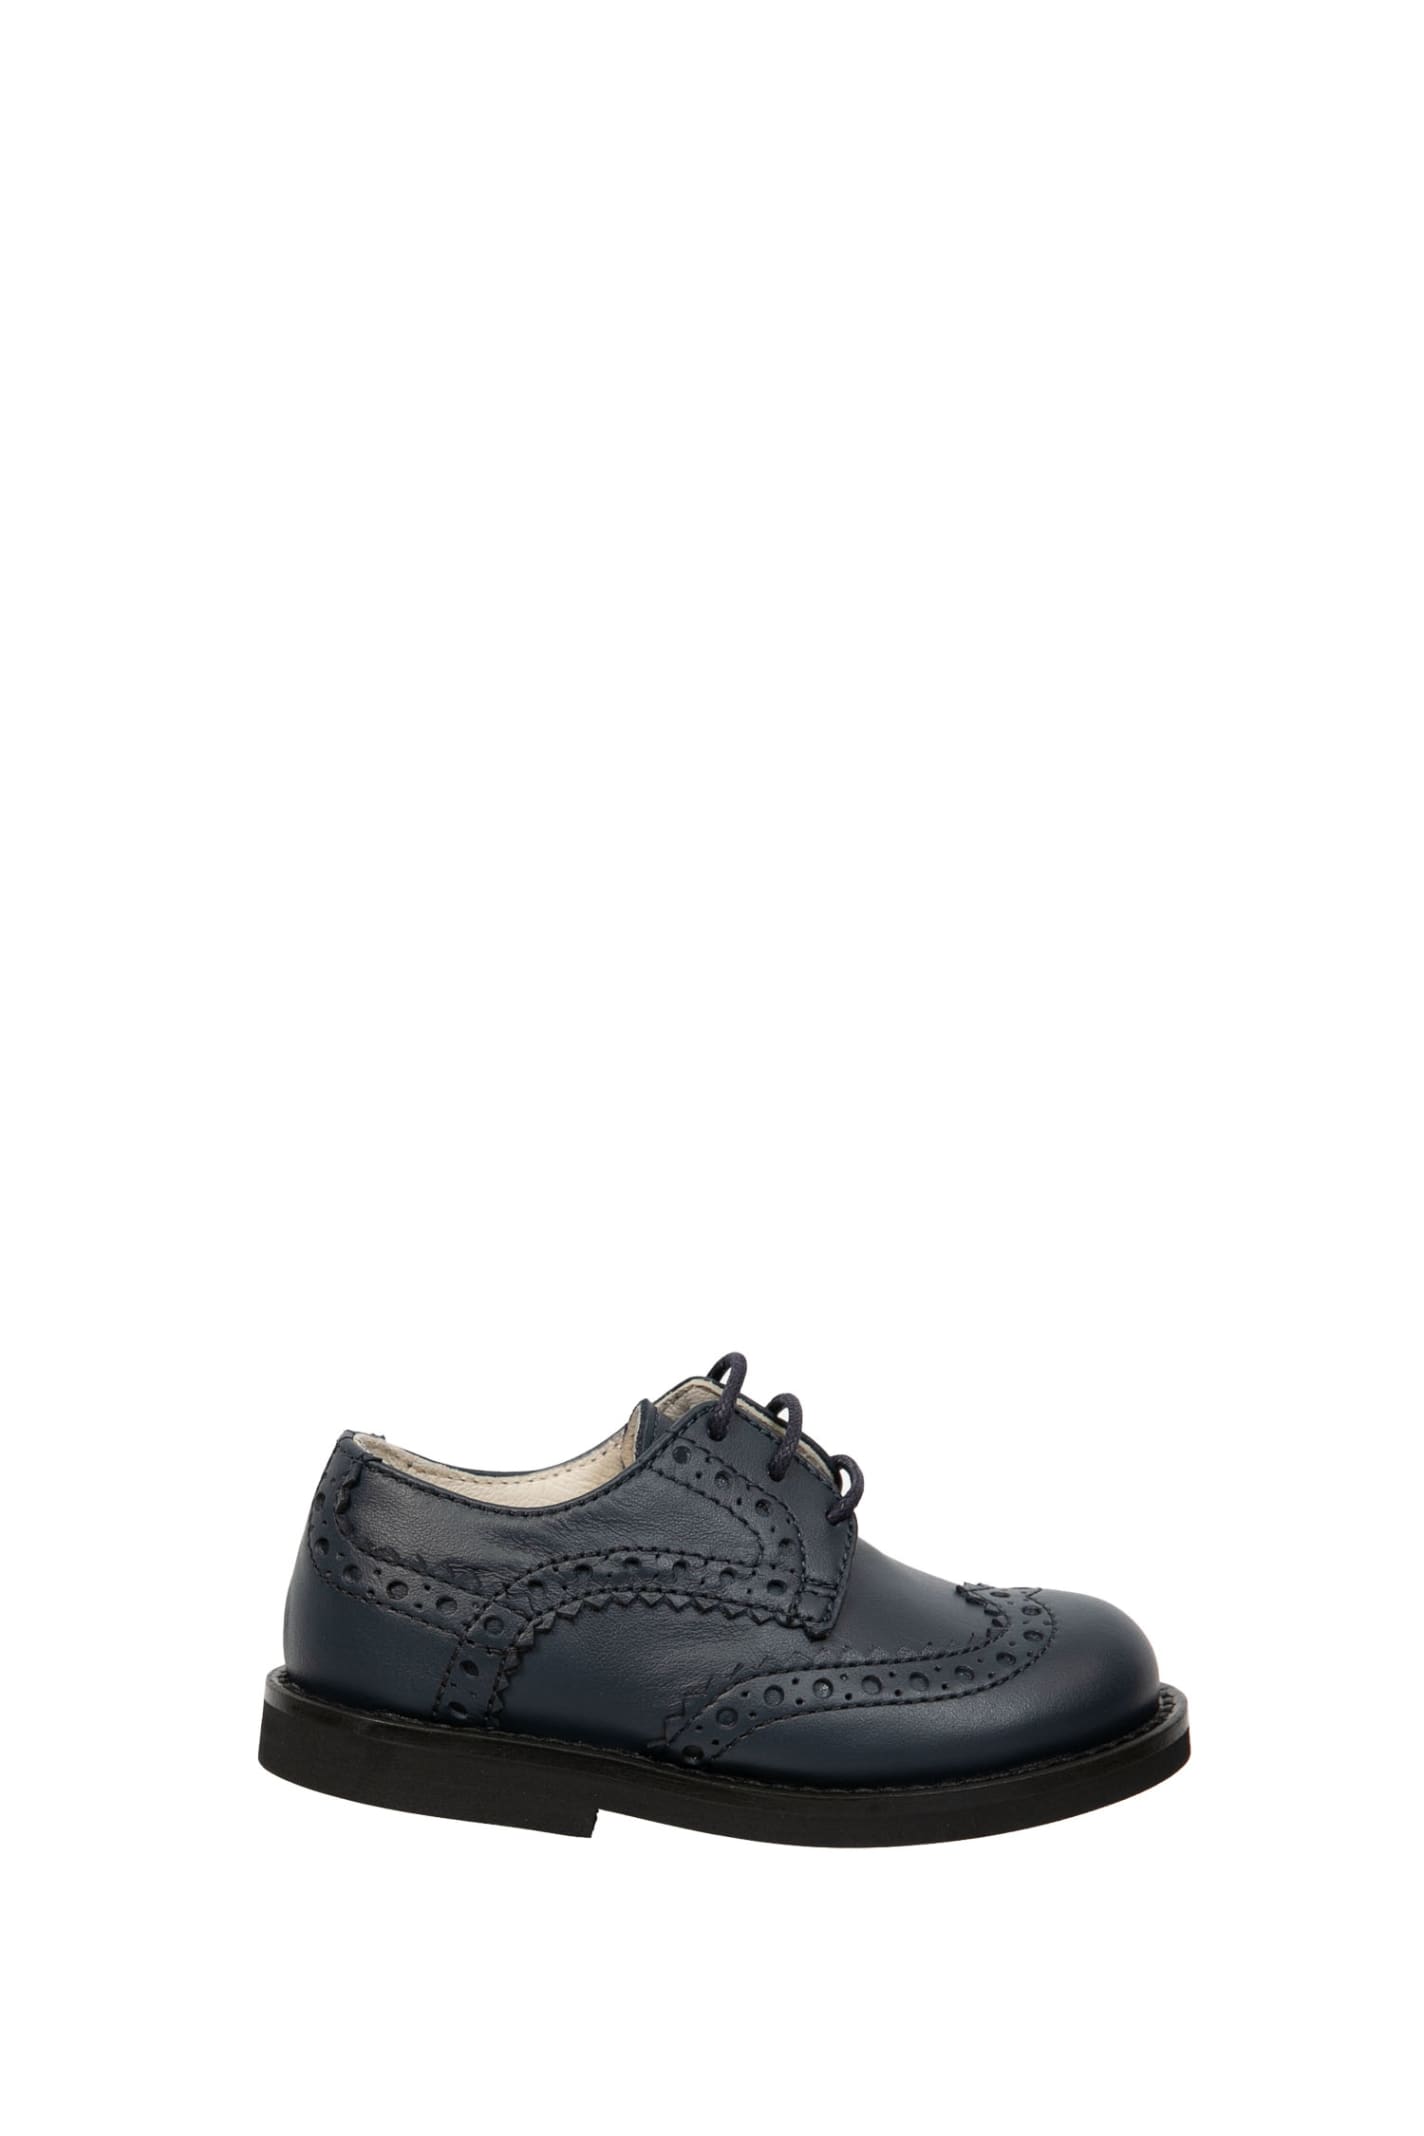 Andrea Montelpare Kids' Leather Shoes In Blue